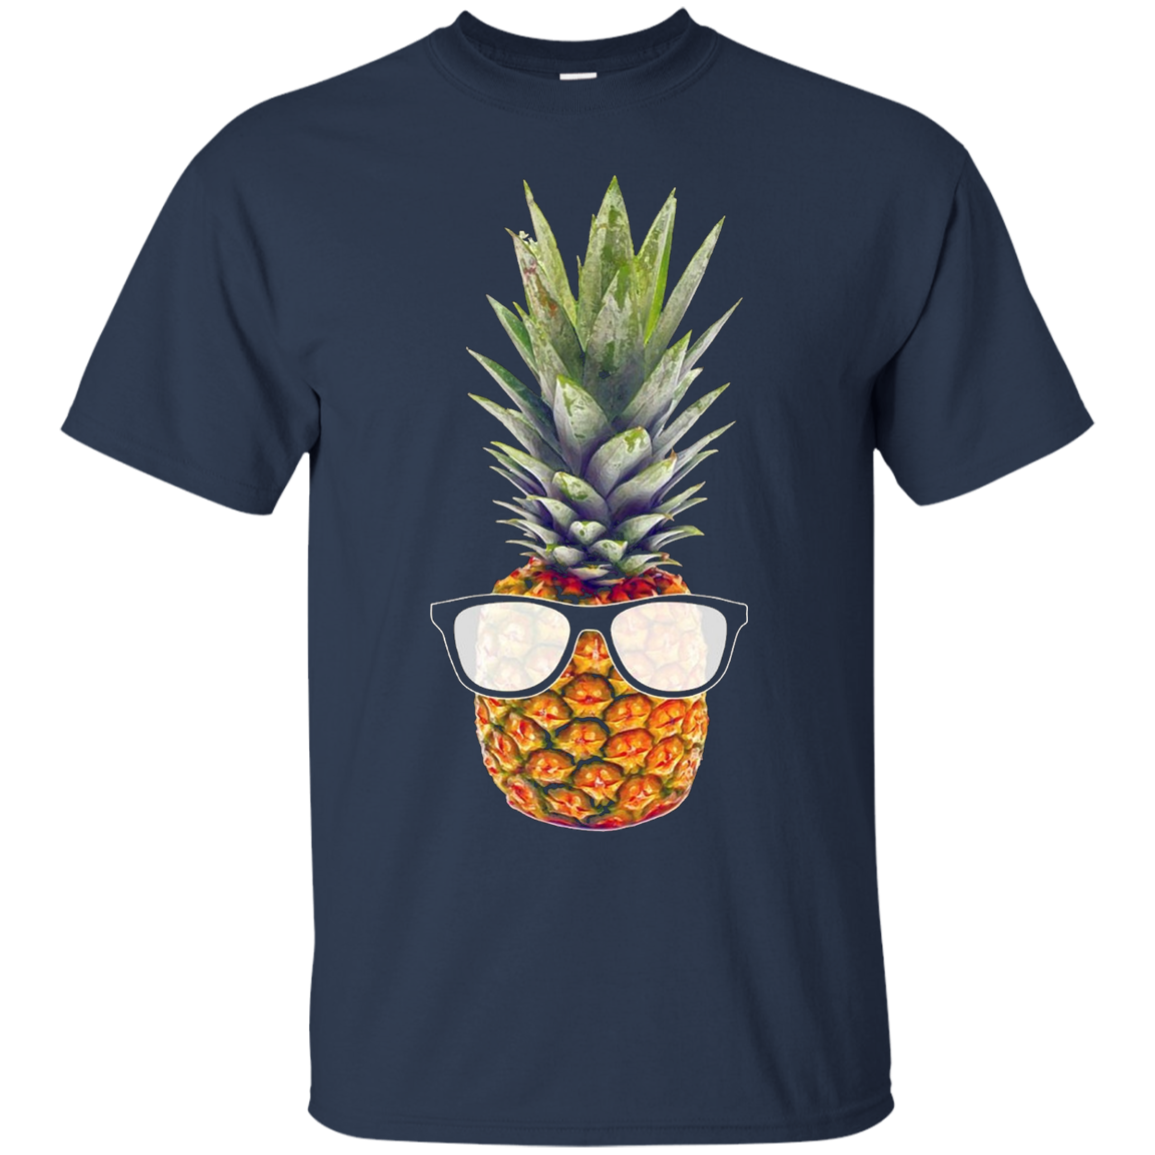 Cool Pineapple Graphic T-Shirt with Black Sunglasses Black